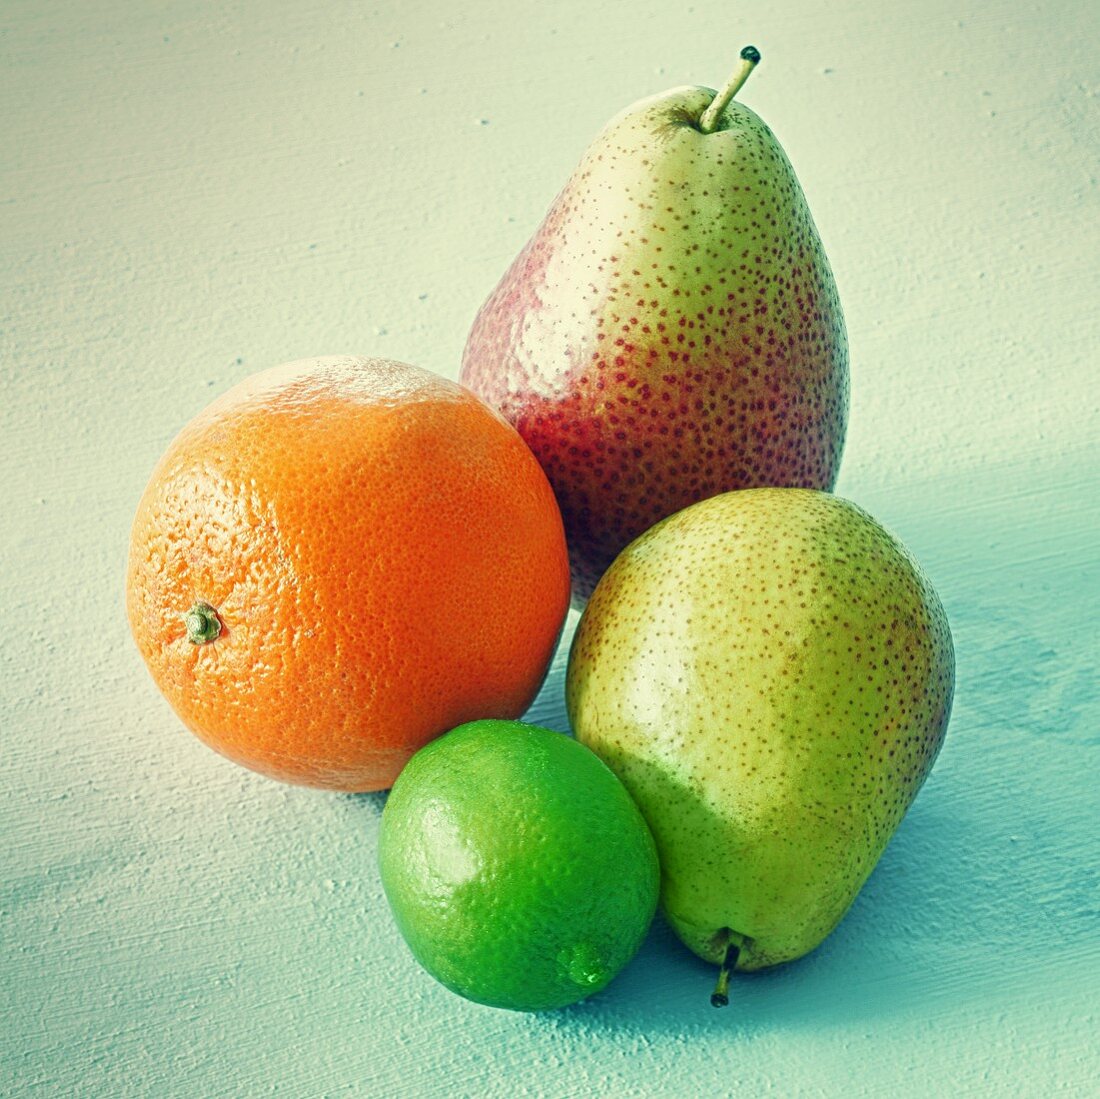 Oranges, limes and pears